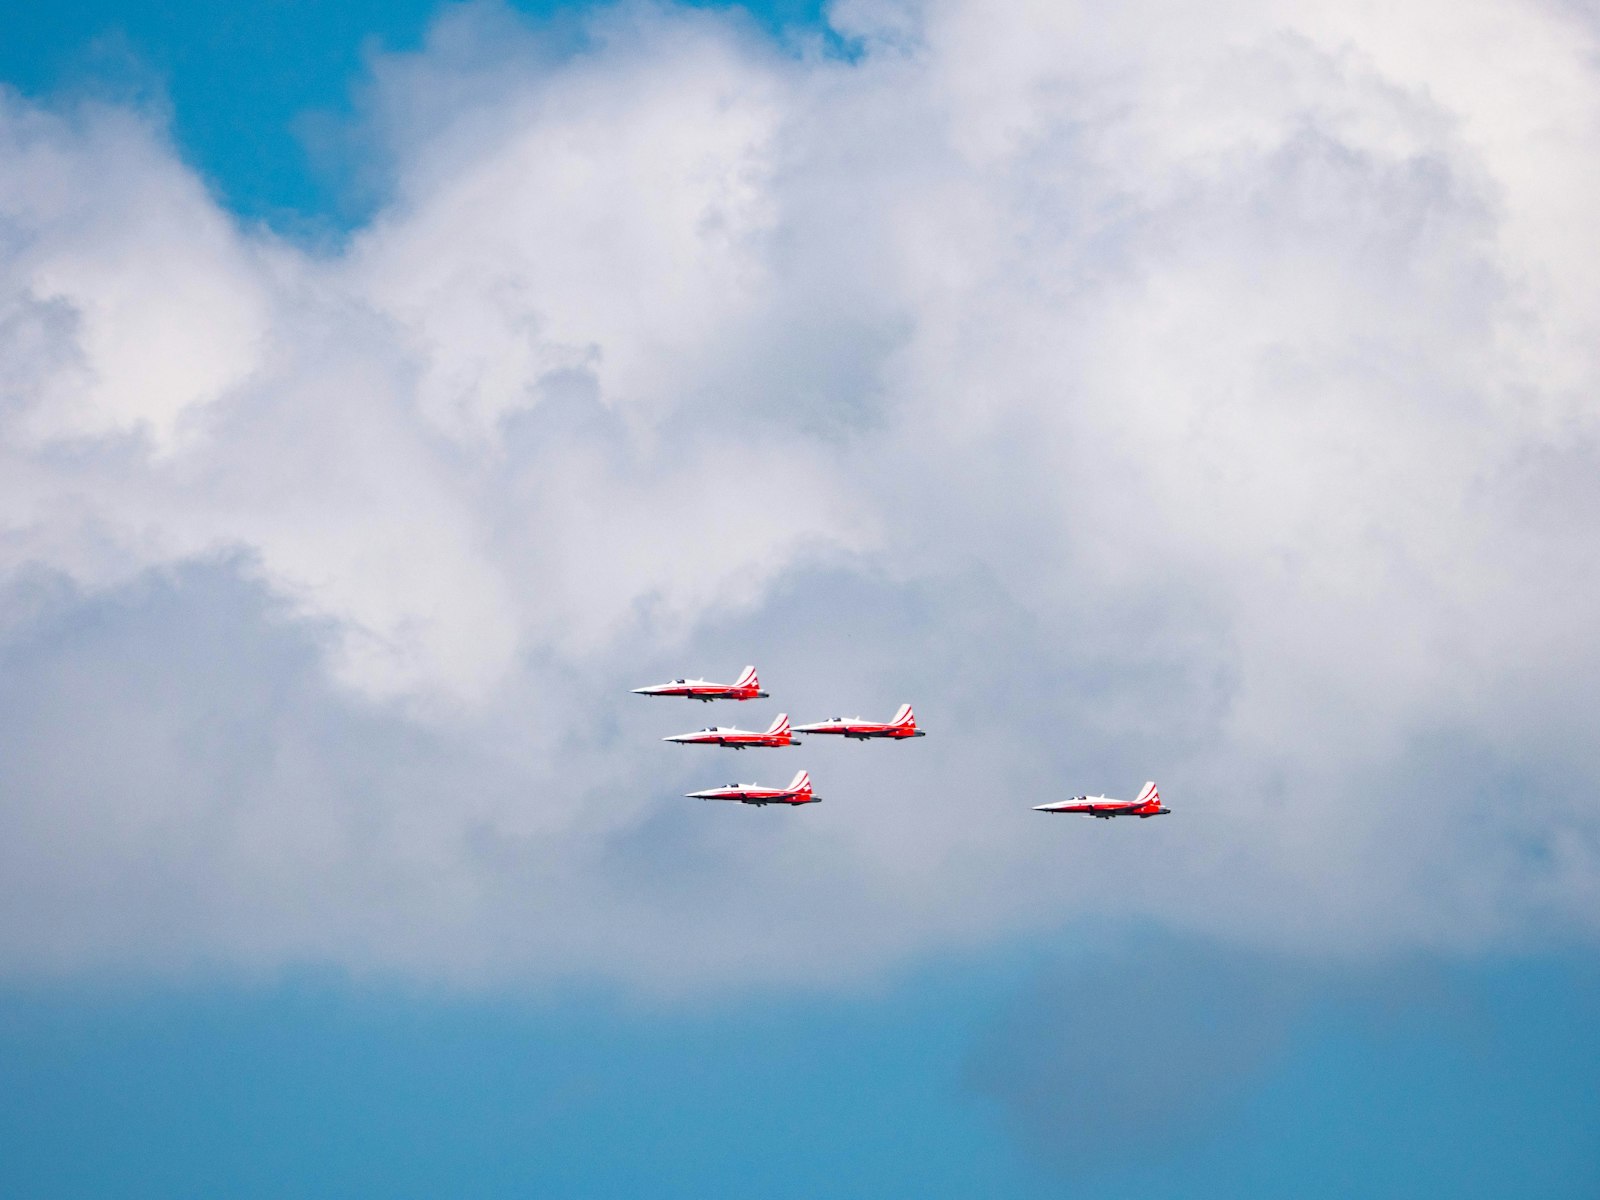 Panasonic Lumix DC-GH5 + LEICA DG 100-400/F4.0-6.3 sample photo. Five red-and-white planes in photography